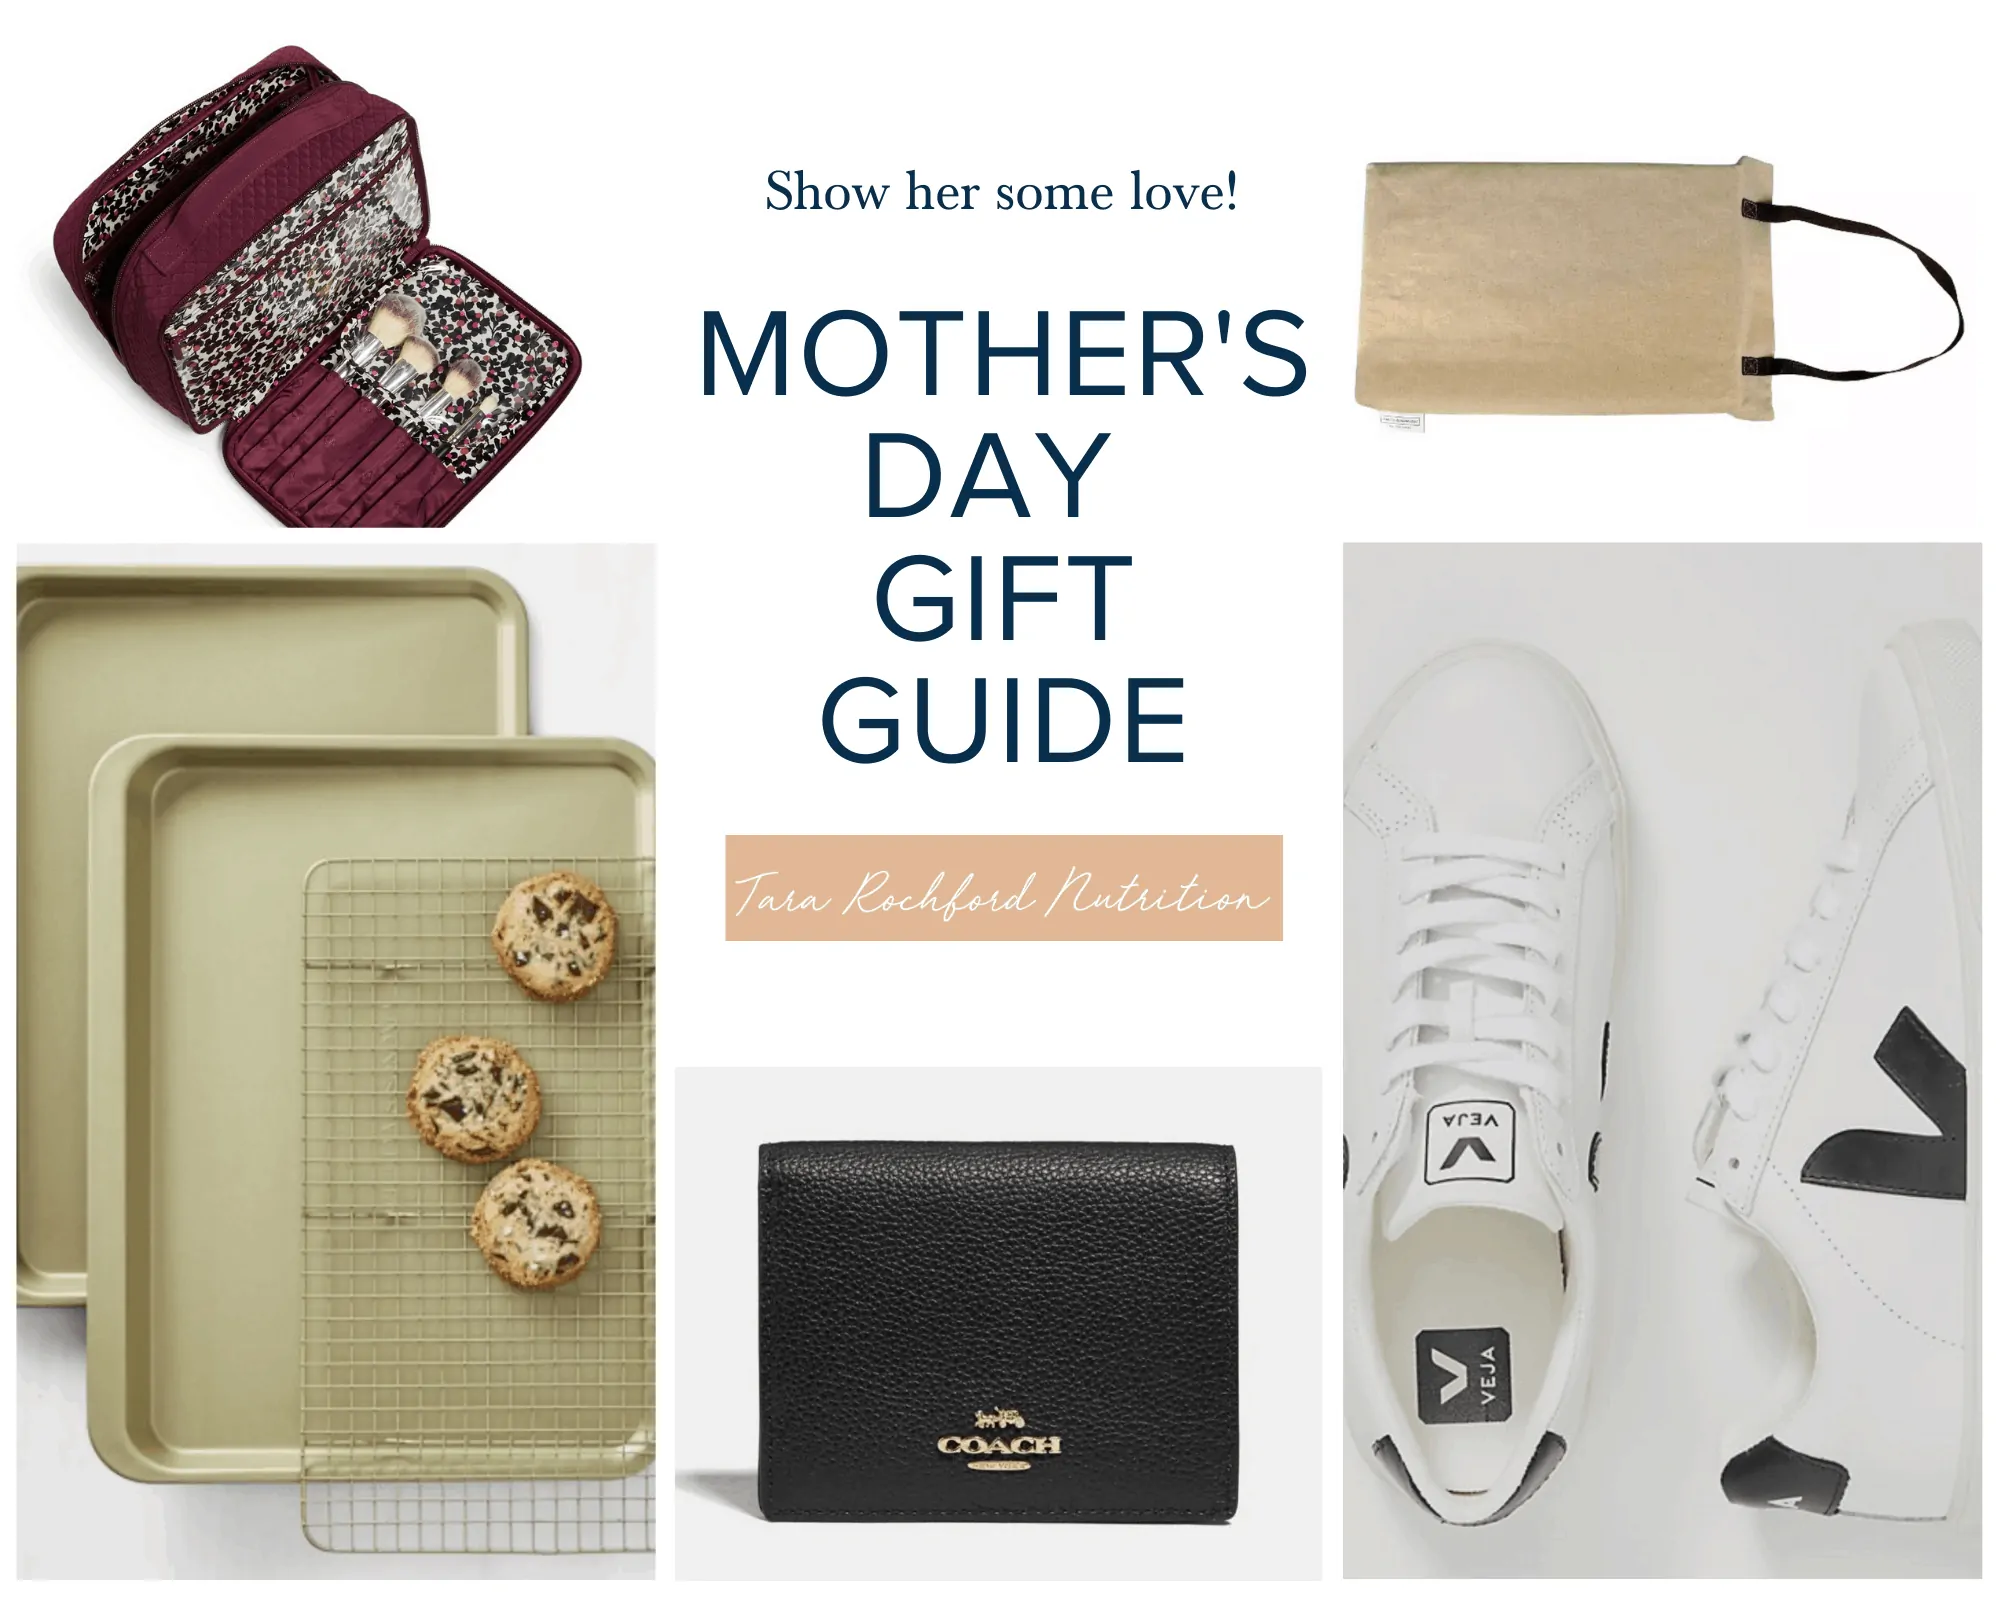 Mother's Day Gift Guide #mothersday #tararochfordnutrition